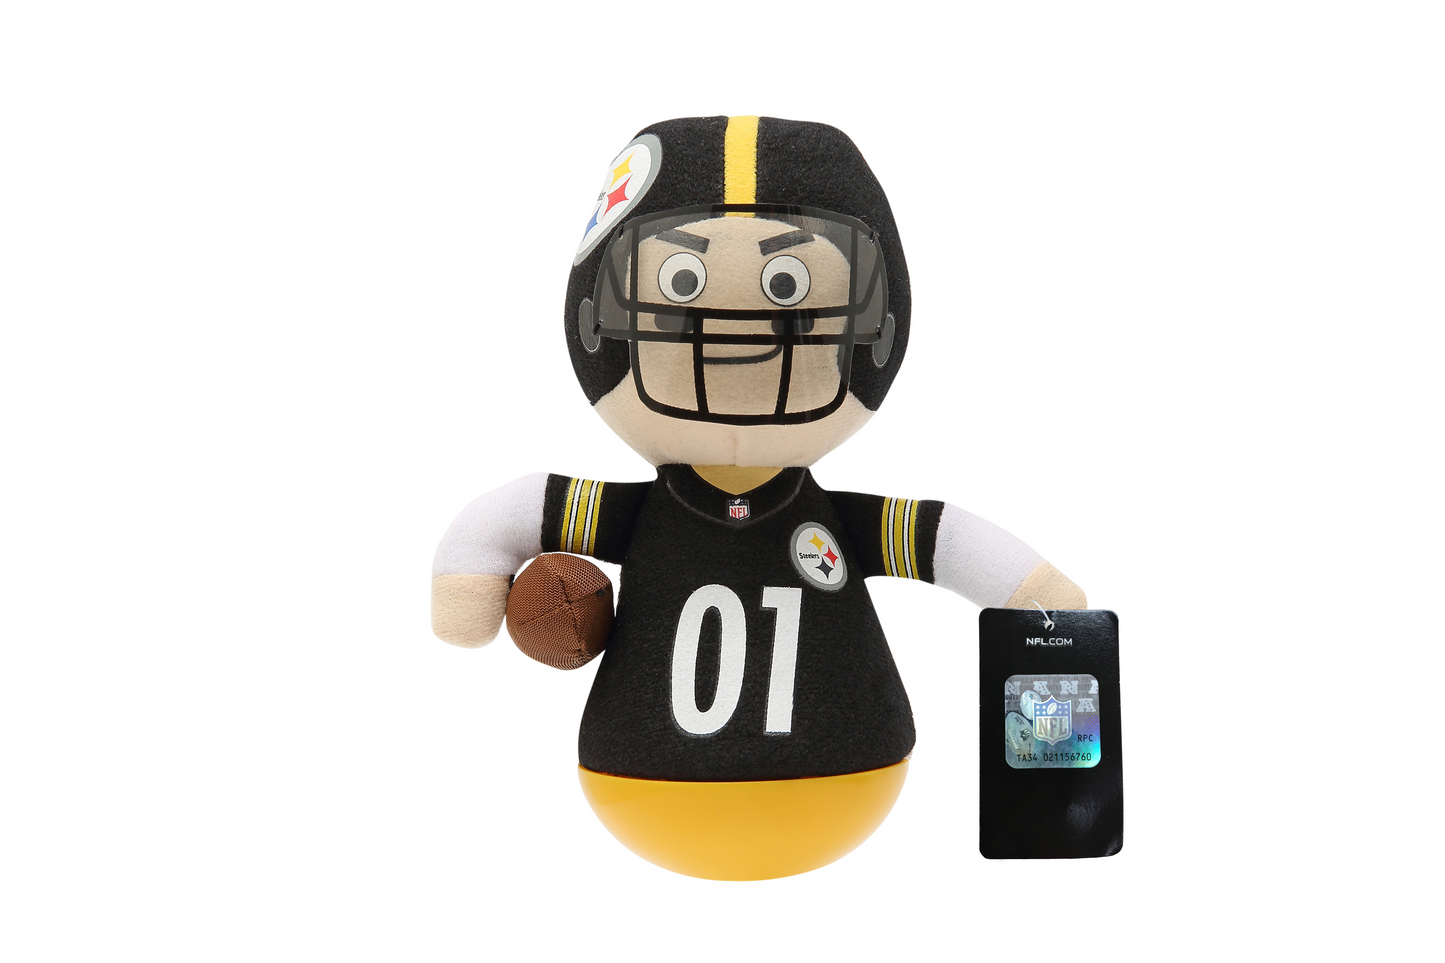 NFL Rock'emz Collectible Sports Figurine - 7 in. tall (Pittsburgh Steelers)